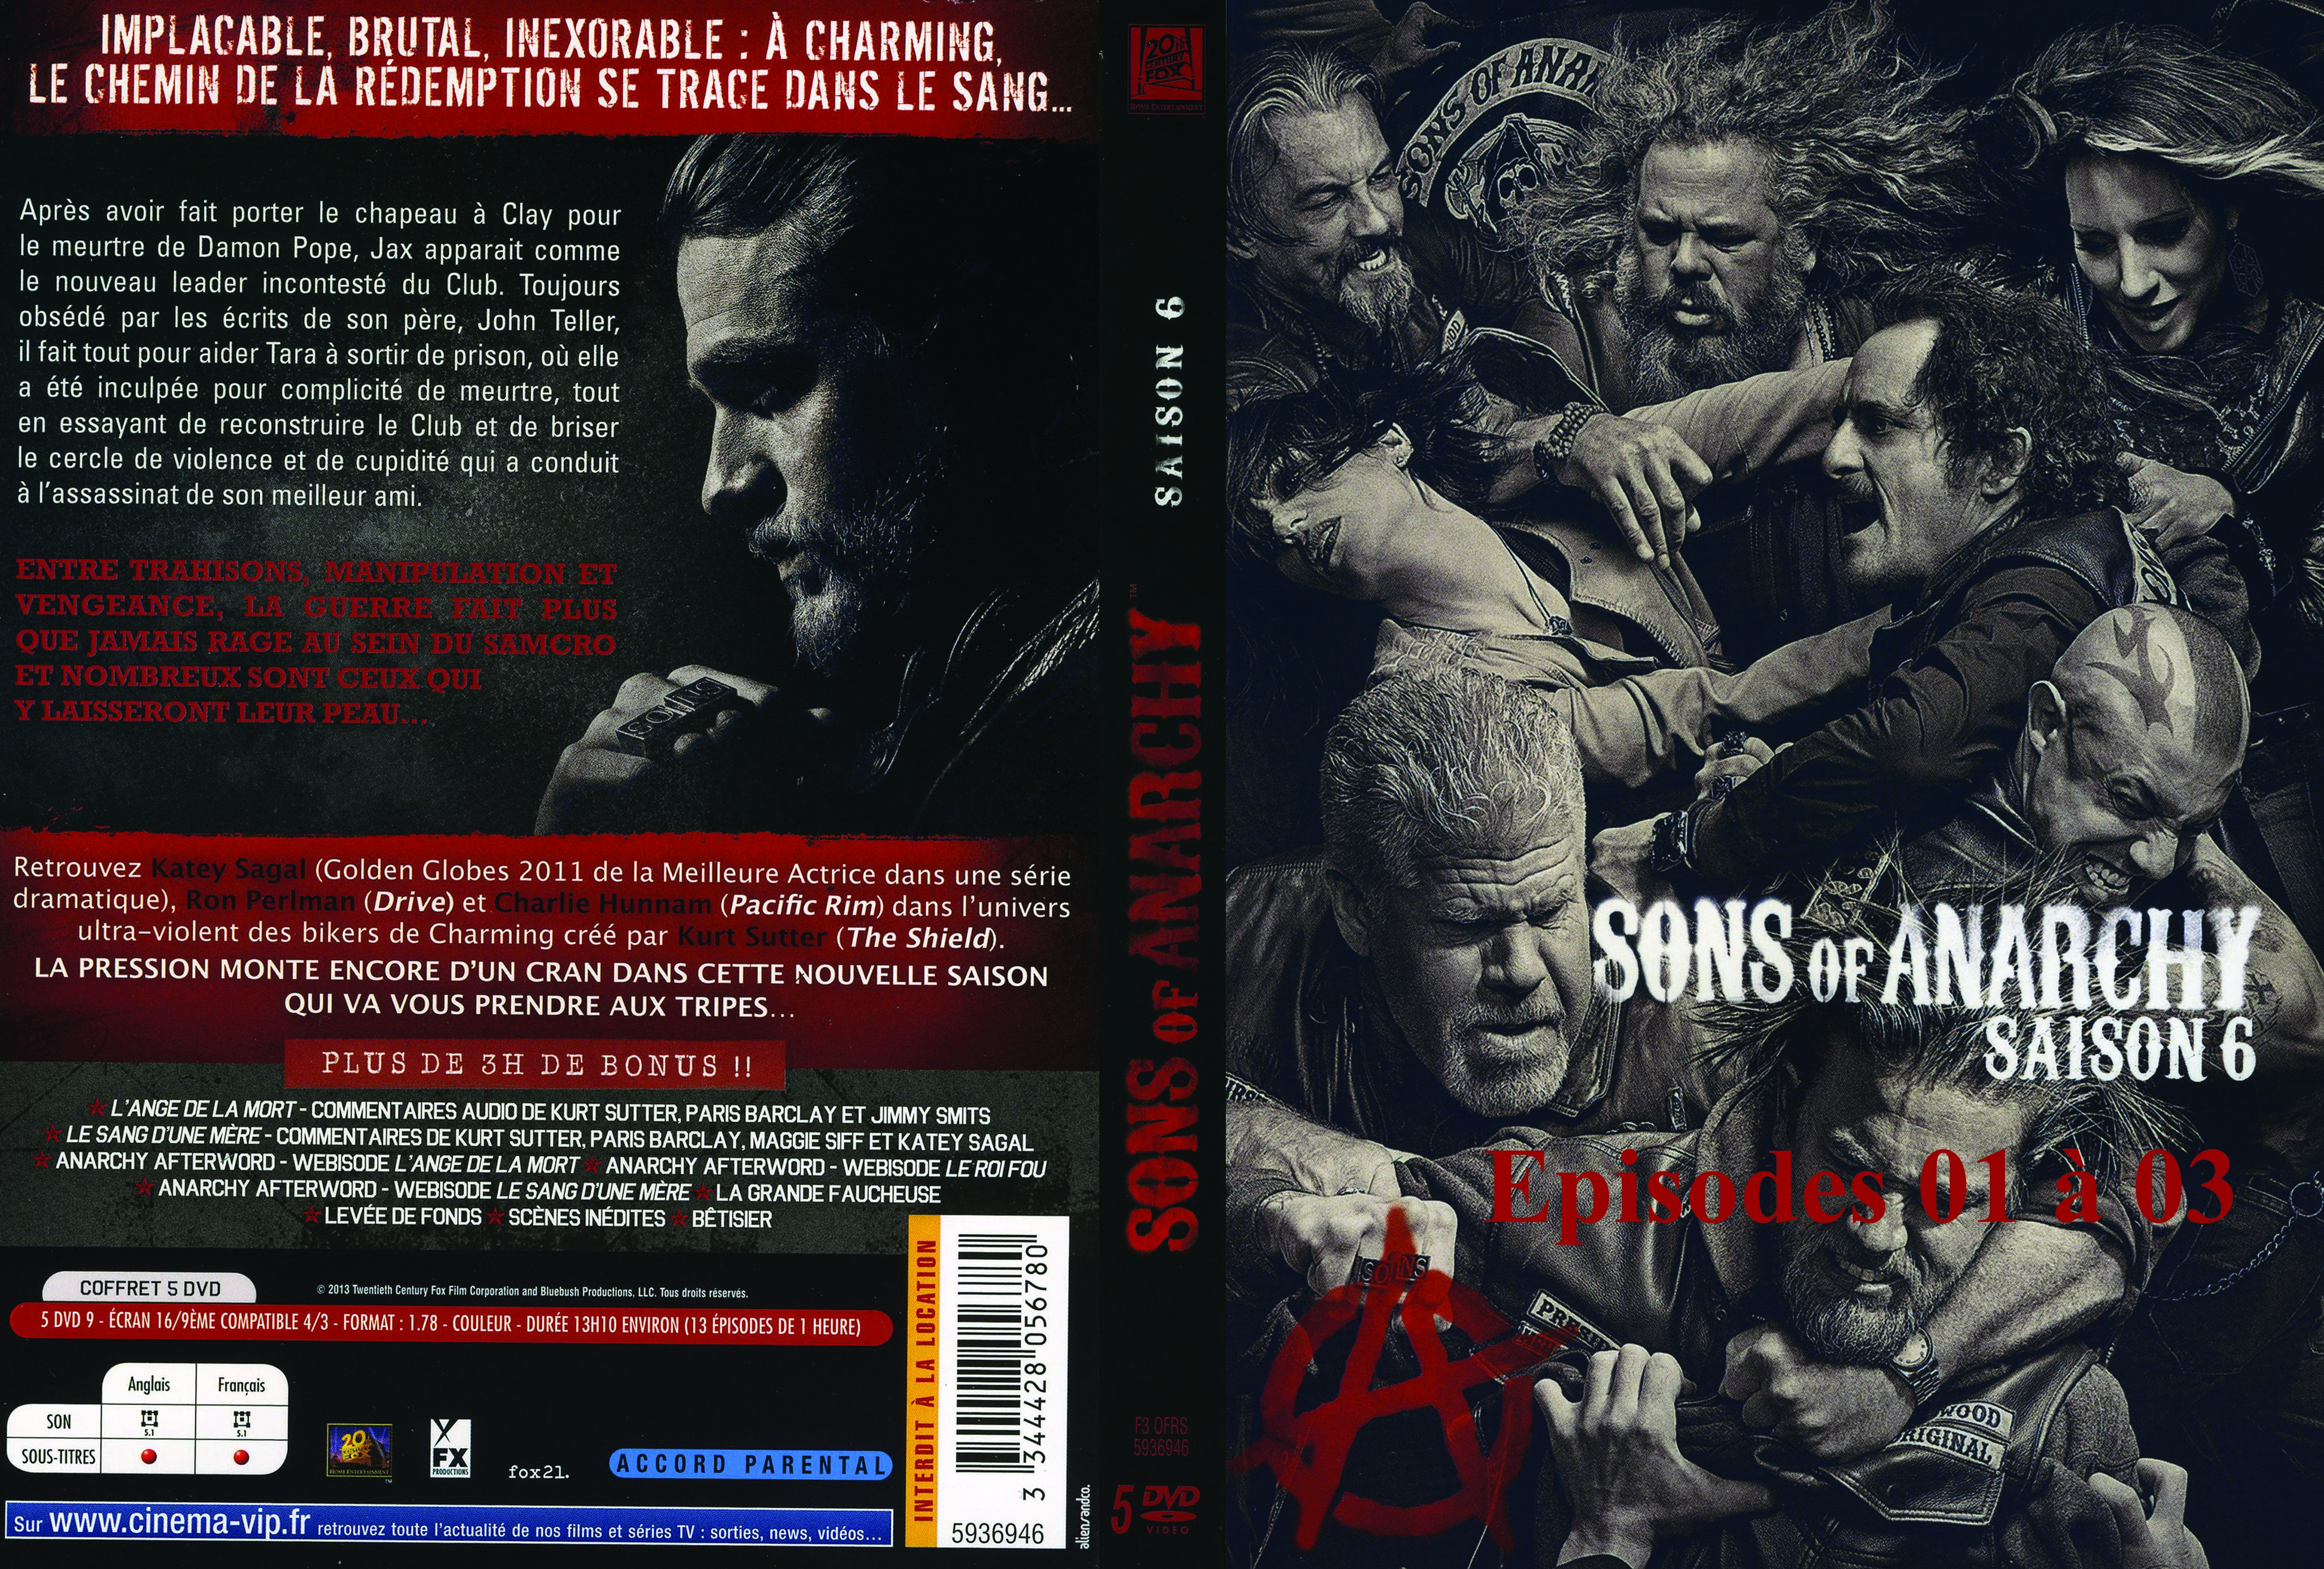 Jaquette DVD Sons of anarchy saison 6 DVD 1 custom